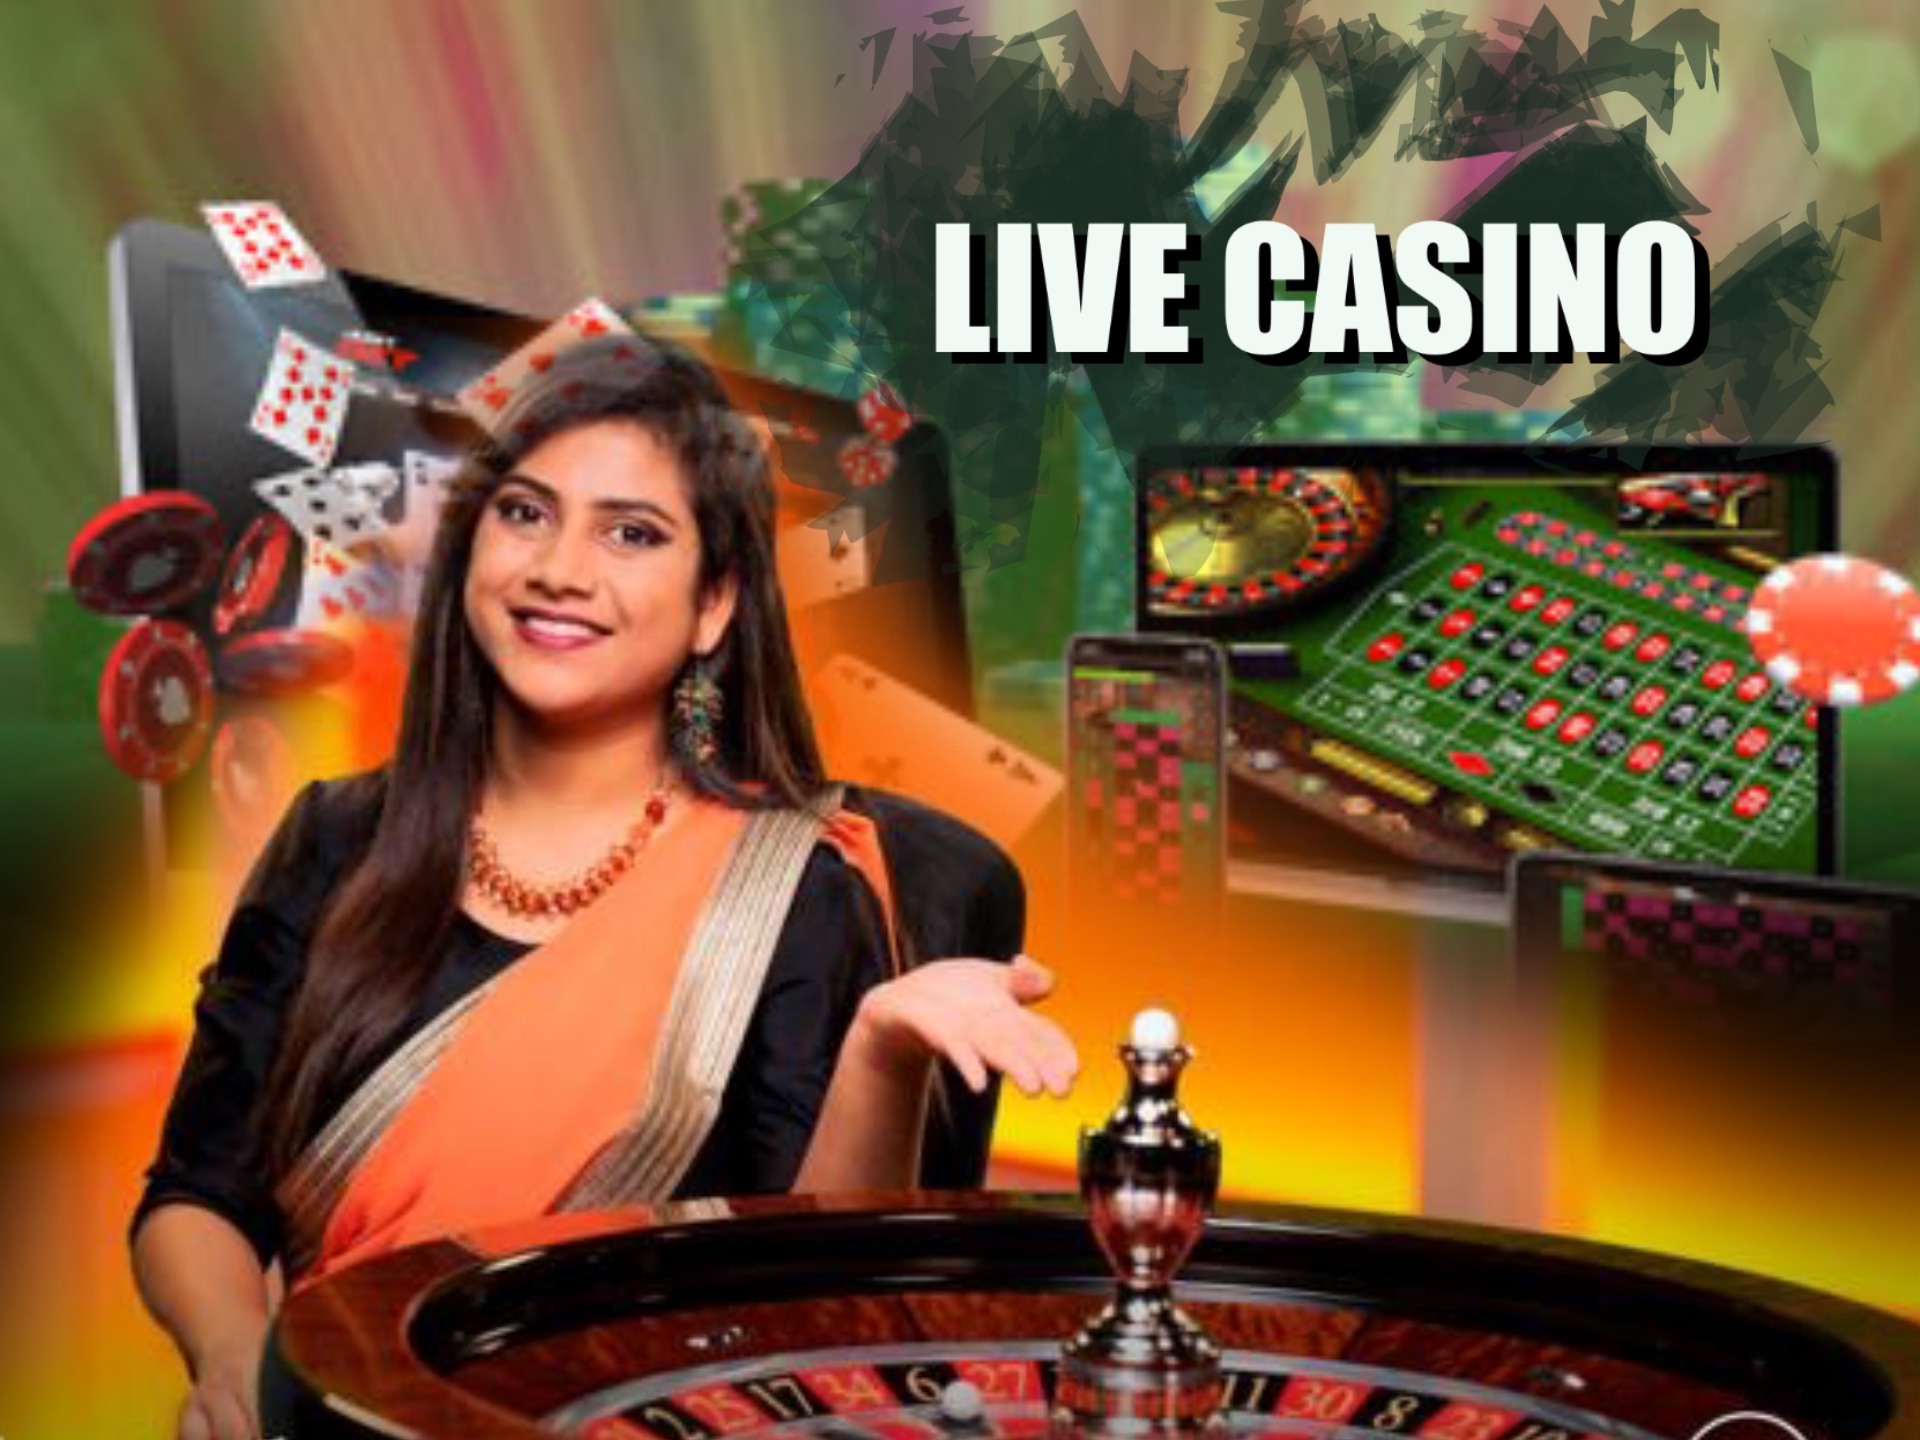 Experience the atmosphere of a real casino with live casino games.